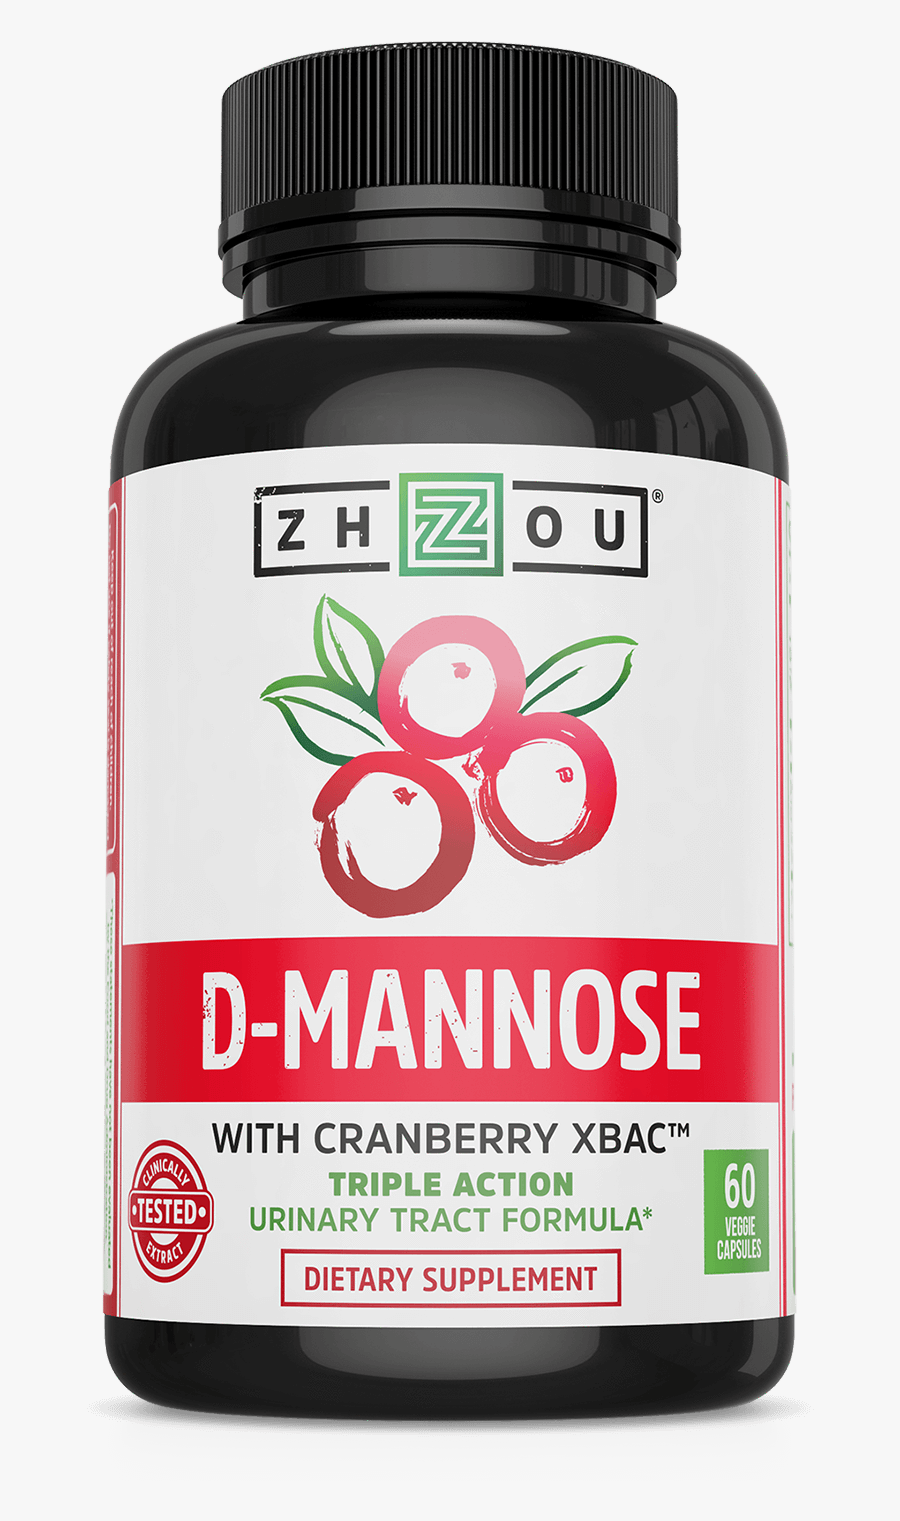 Cranberry Xbac D Mannose Urinary Tract Formula From - Cranberry With D Mannose, Transparent Clipart